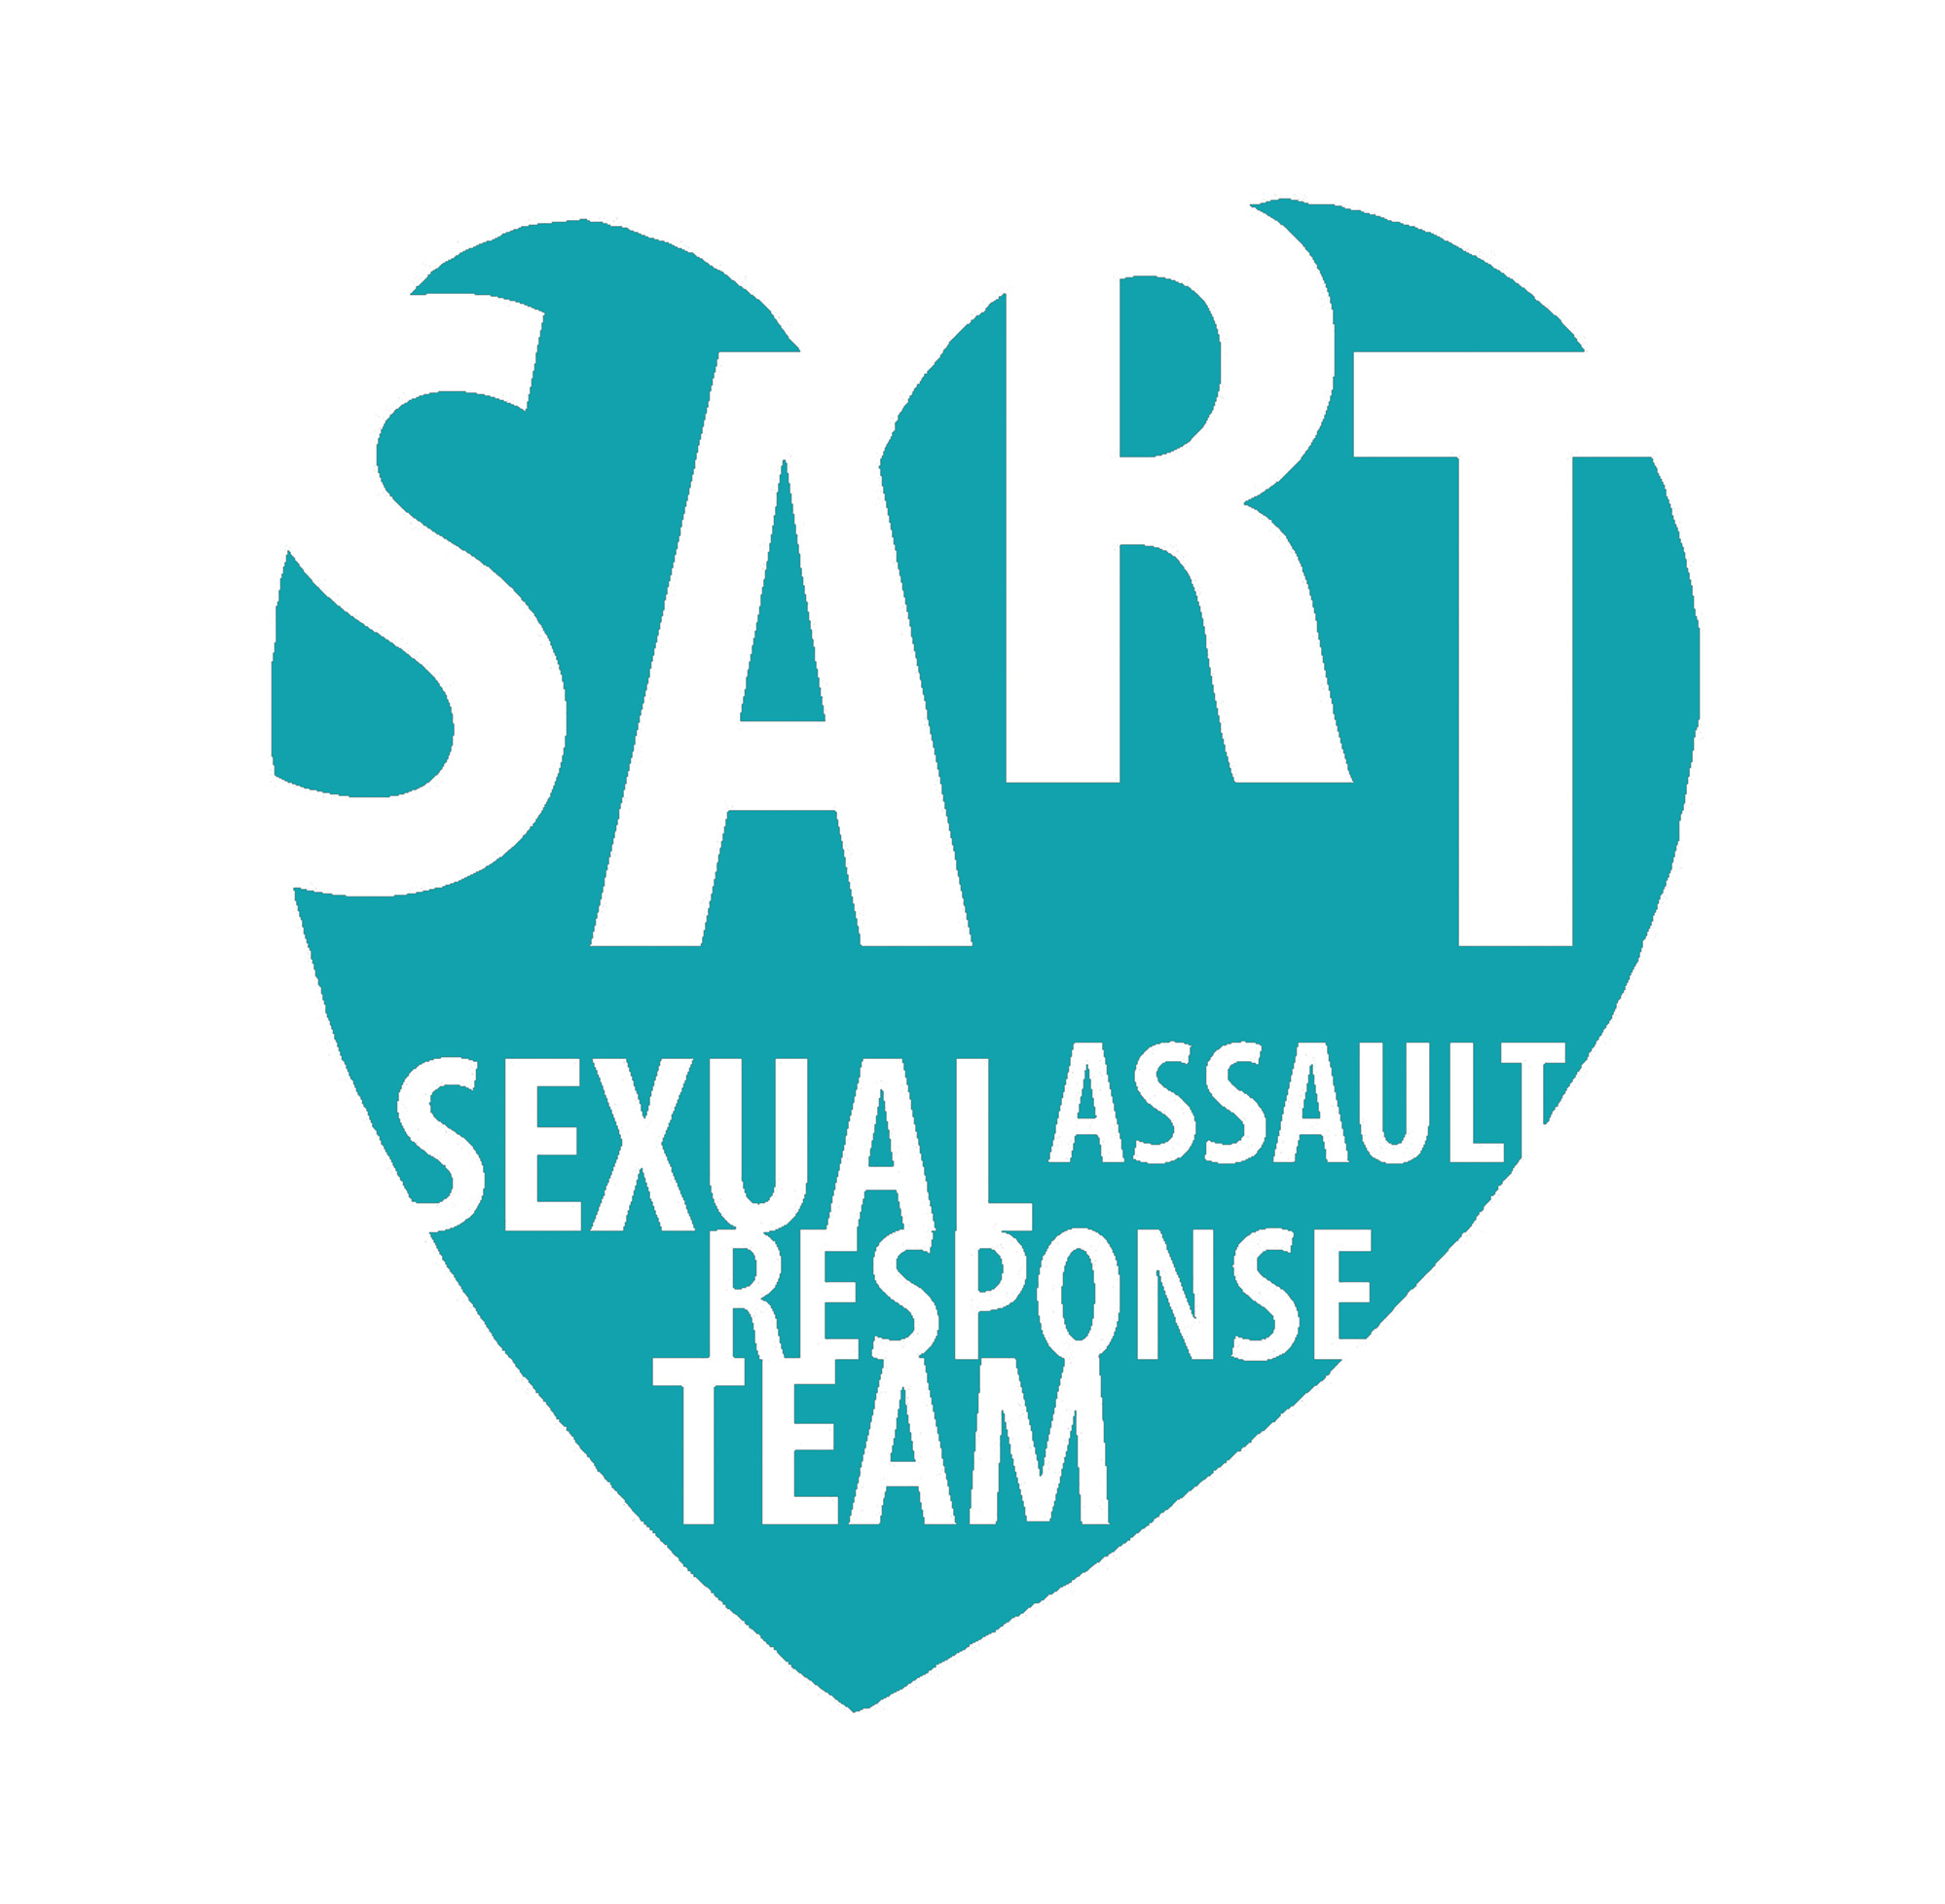 Missouri Campus Efforts To Address The Intersection Of Alcohol And Sexual Violence